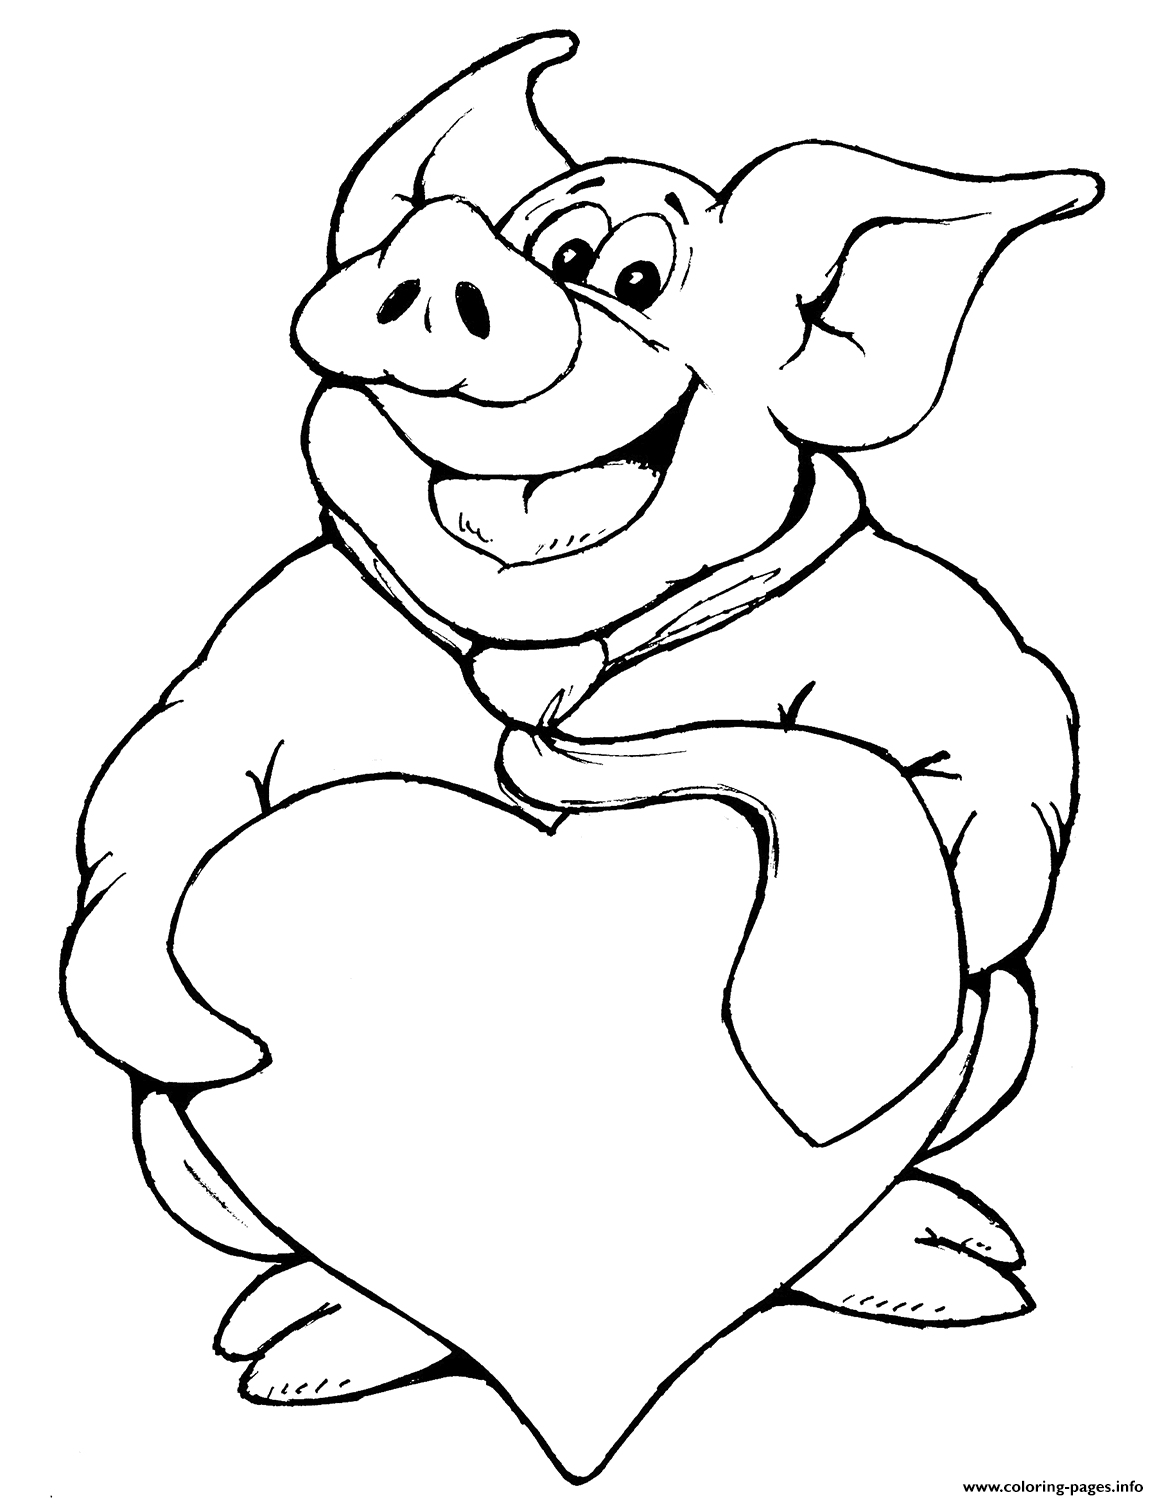 Pig With Heart coloring